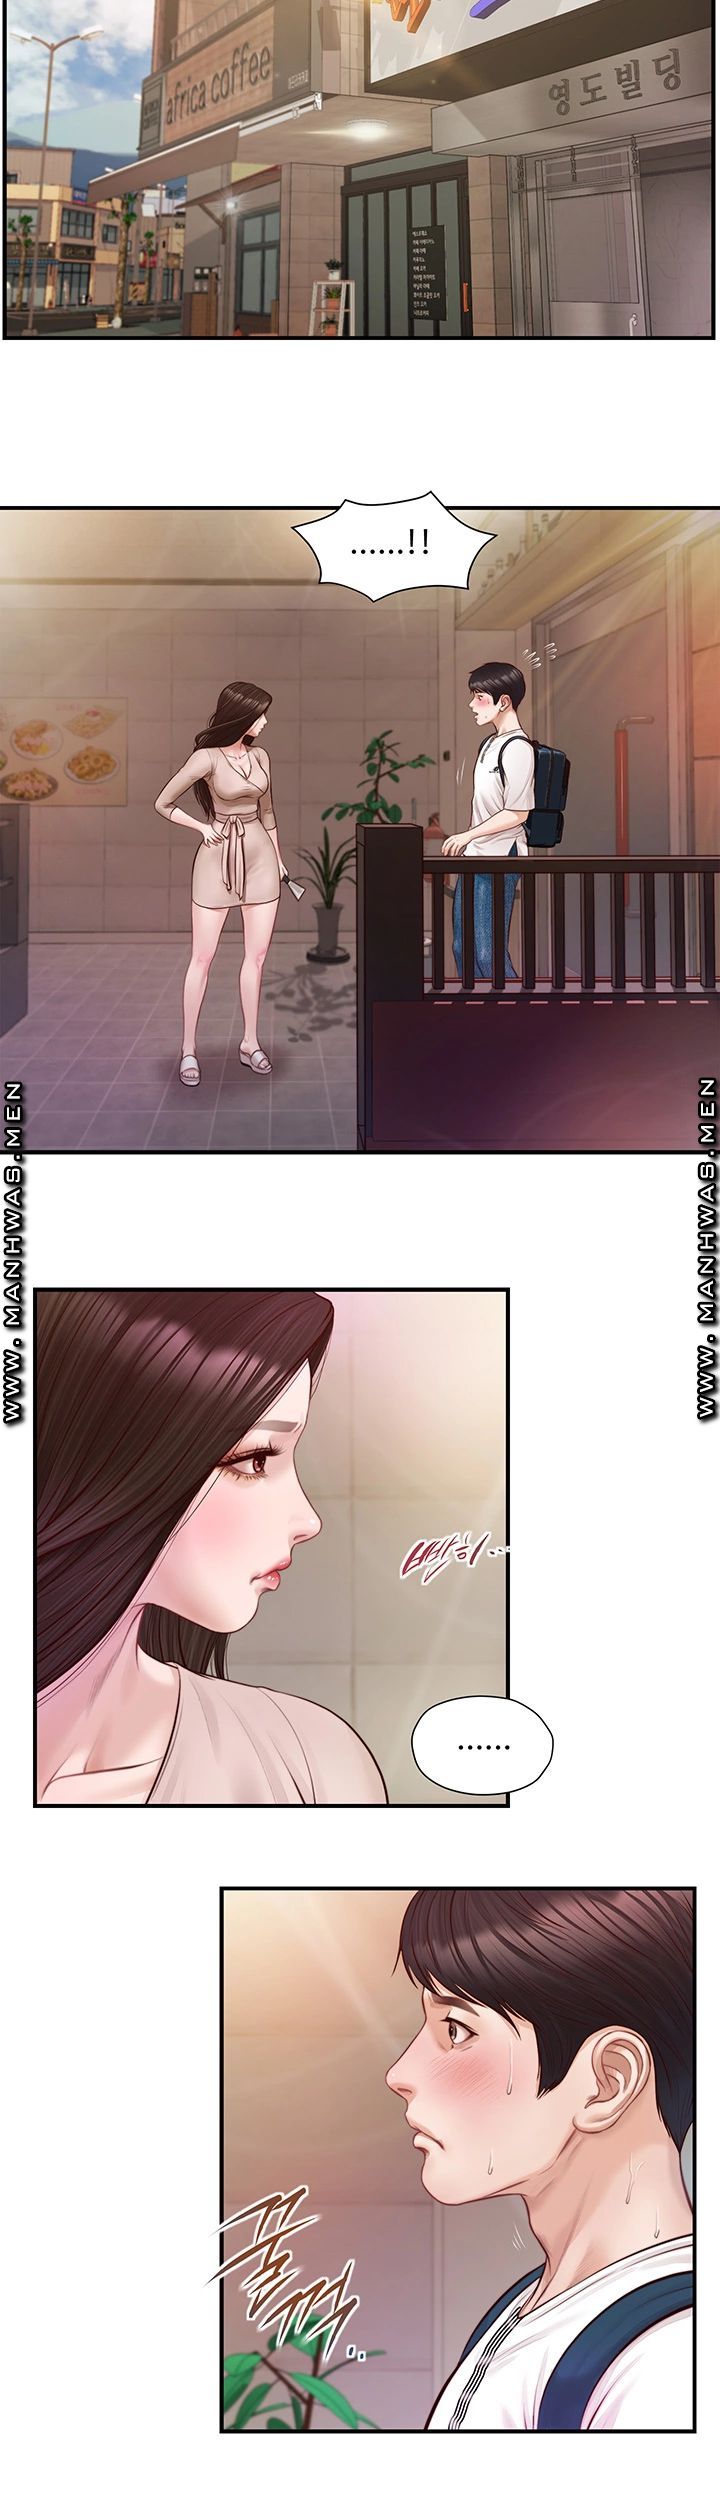 Innocent Age Raw - Chapter 2 Page 5